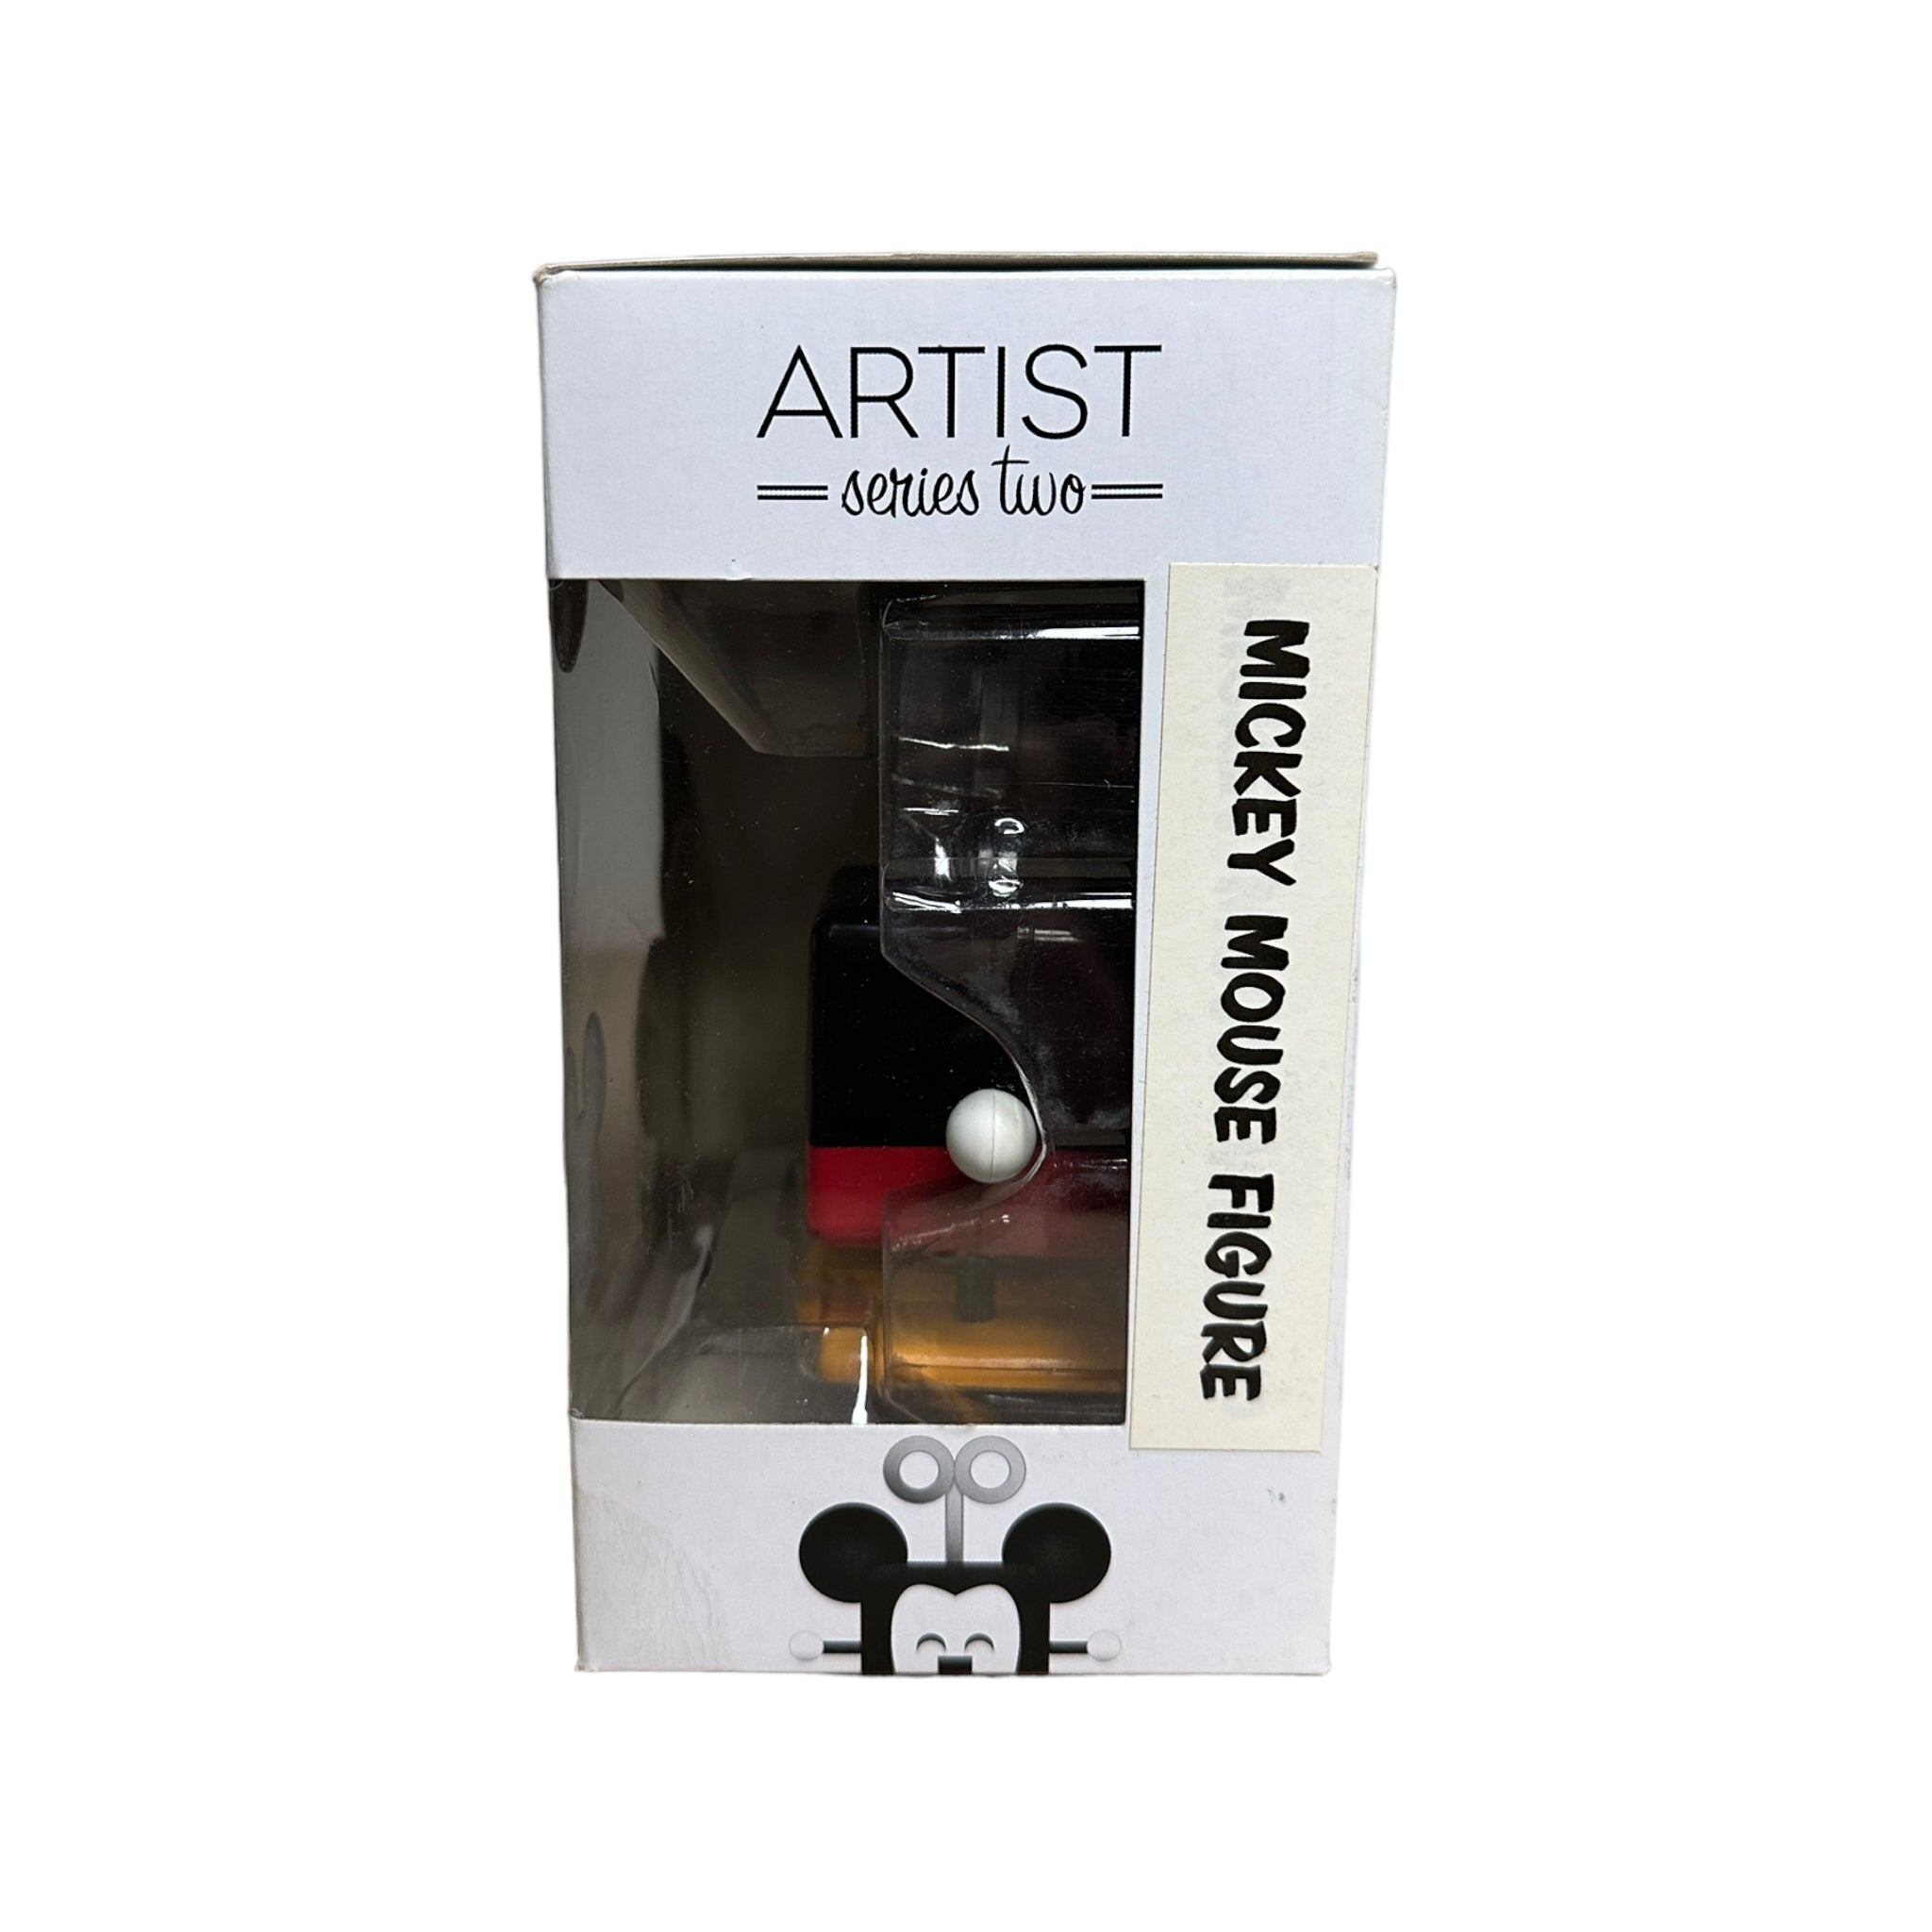 Mickey Mouse Wind Up - Disney Artist Series 2 - D23 2013 Exclusive LE3000 Pcs - Condition 7/10